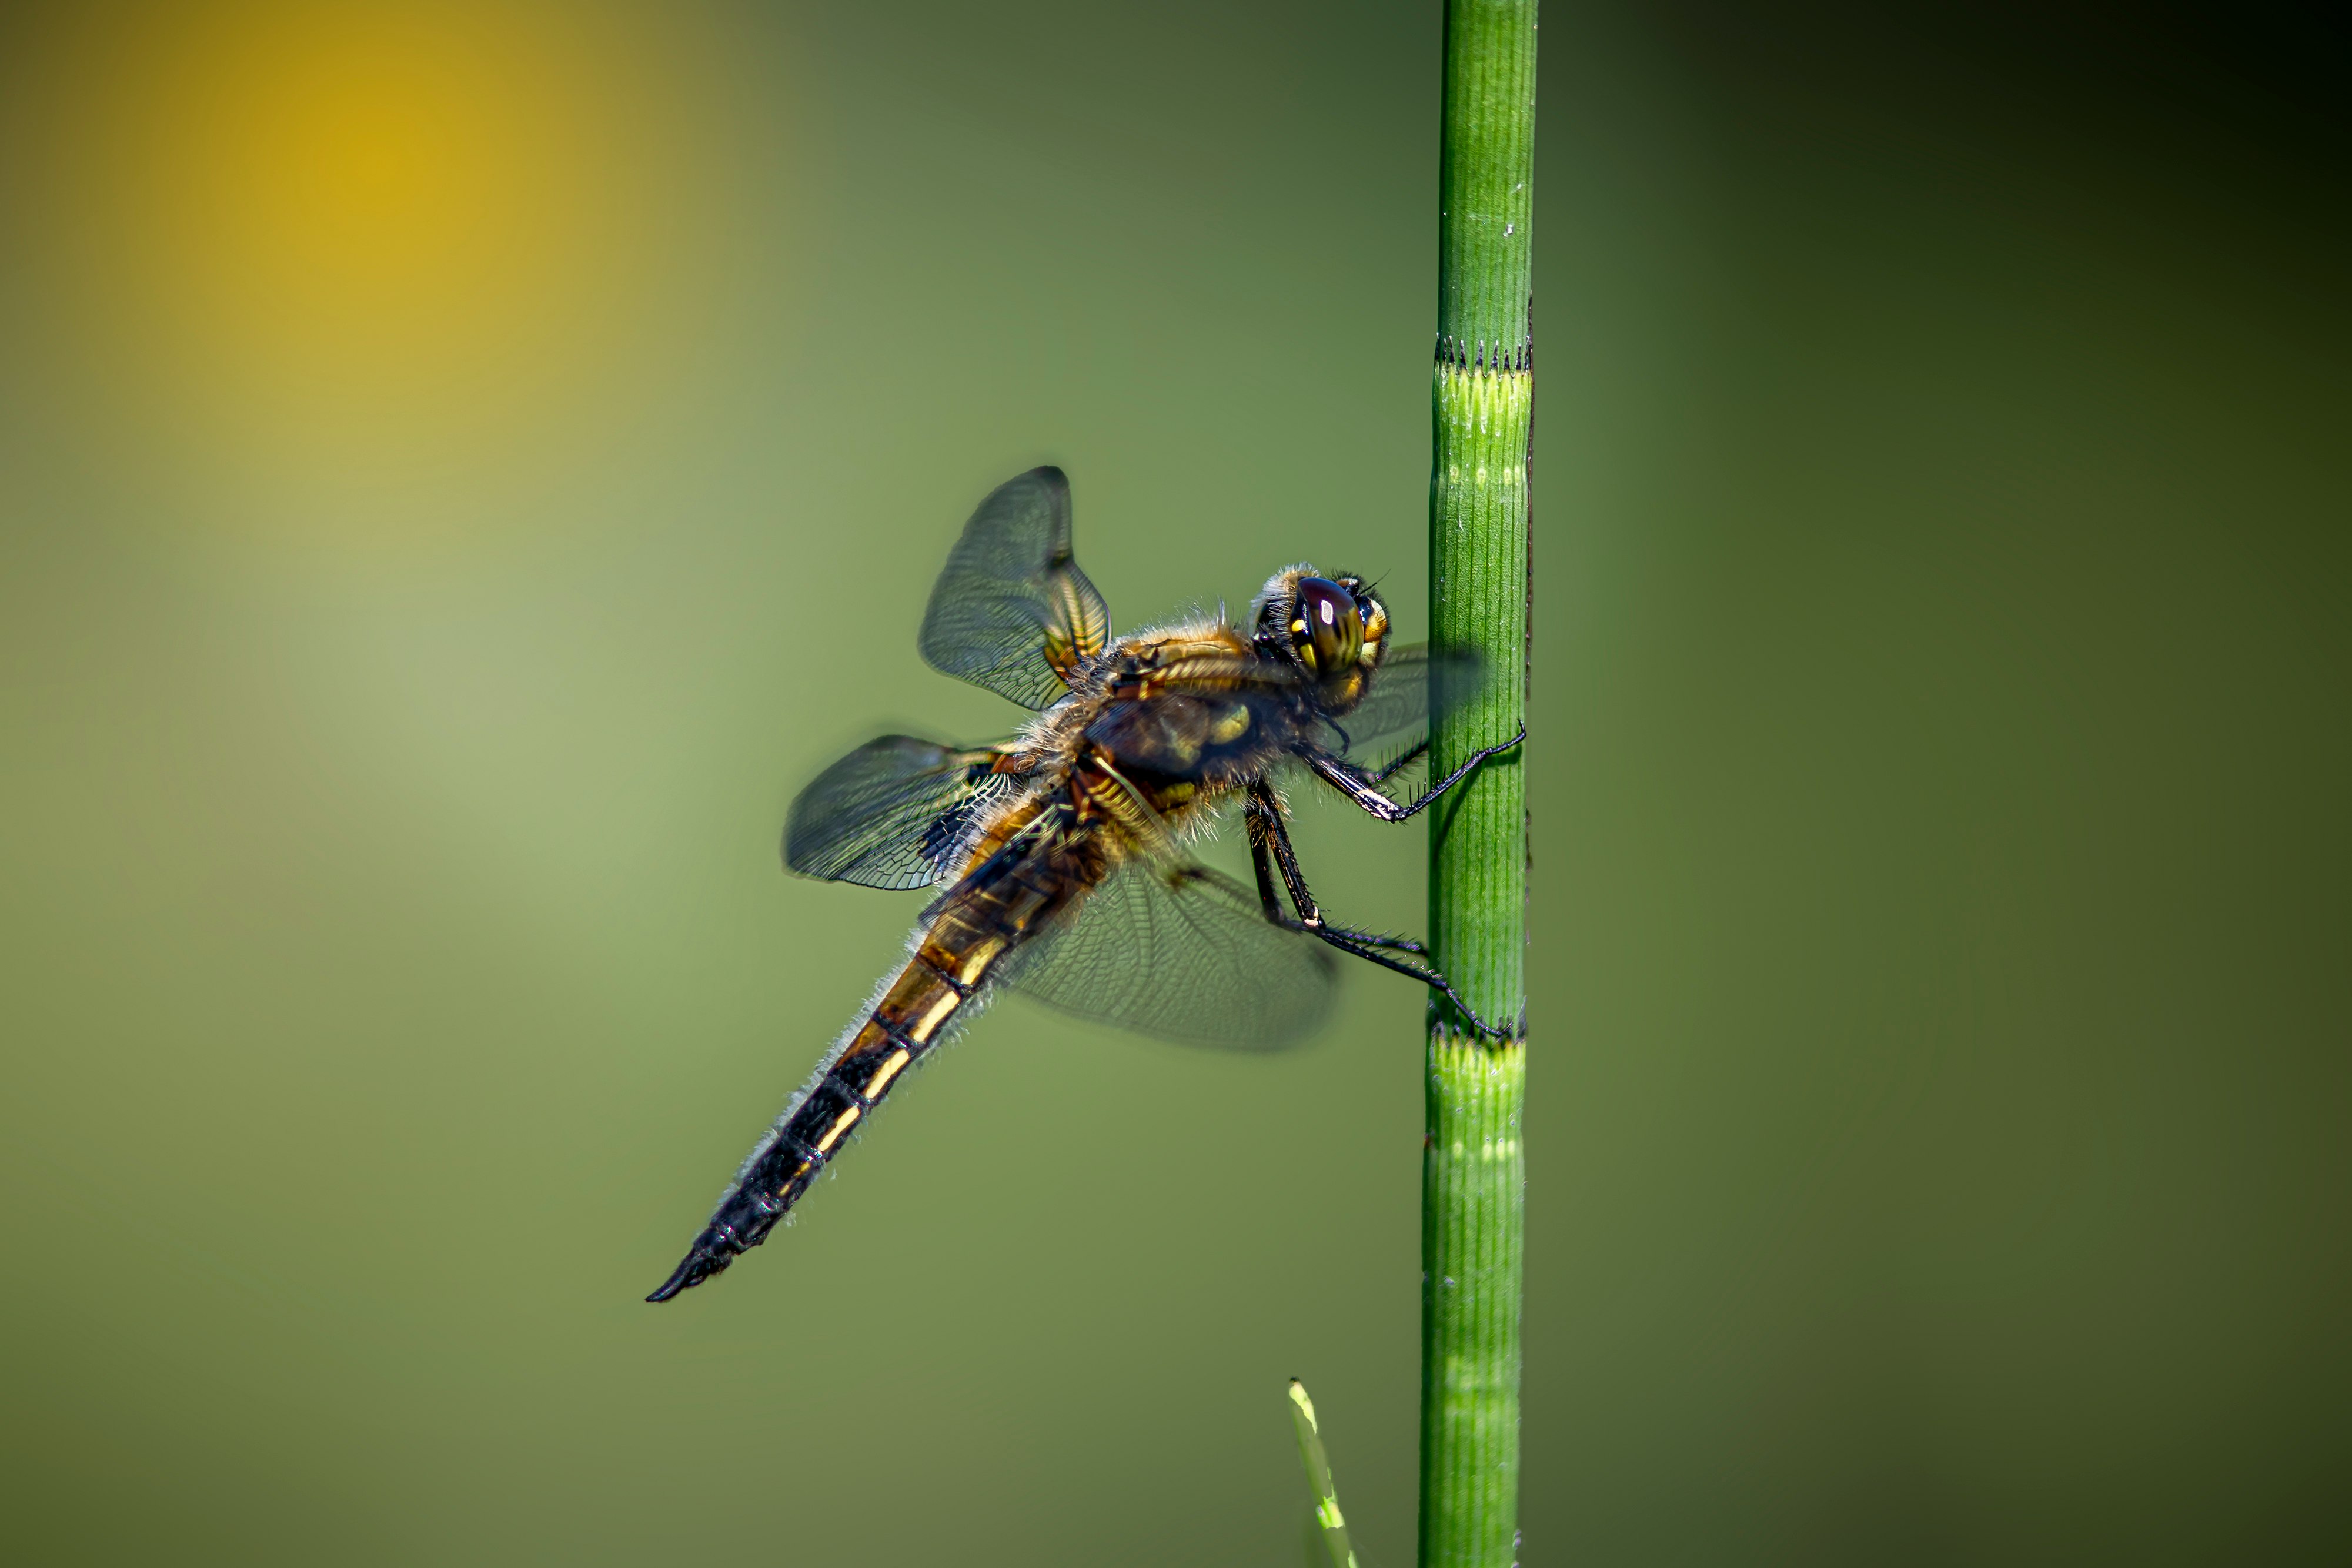 blue and black dragonfly perched on green stem in close up photography during daytime